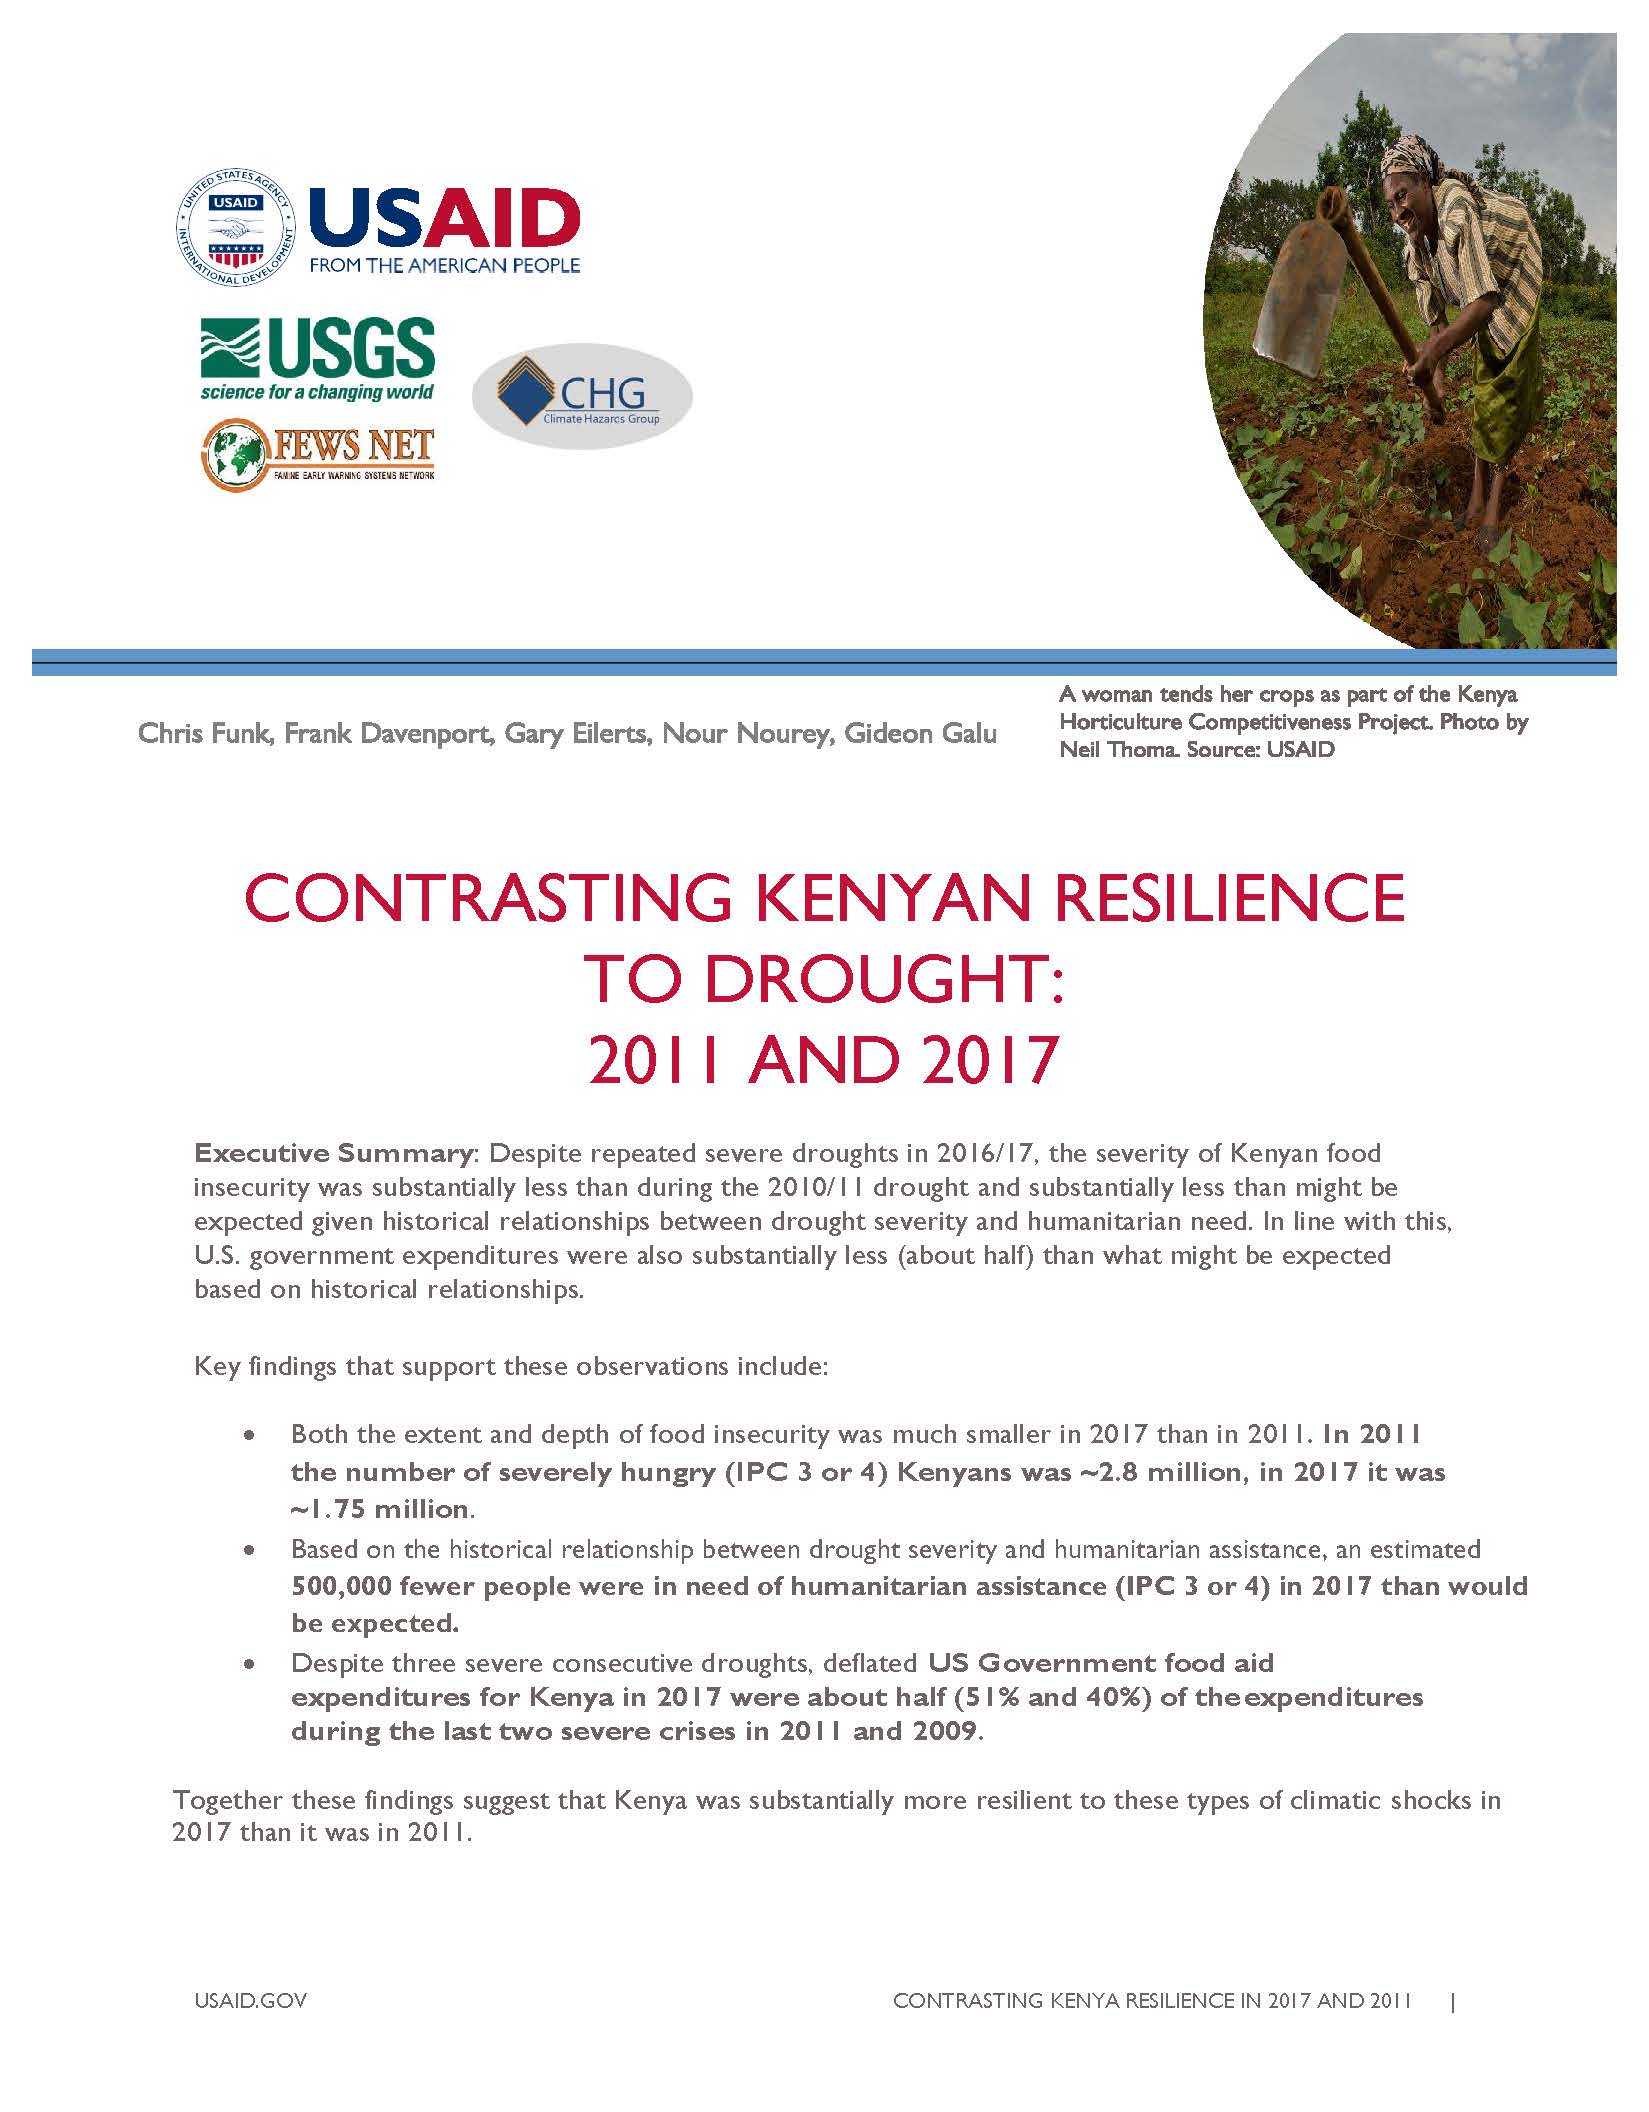 Contrasting Kenyan Resilience to Drought: 2011 to 2017 report (short version)